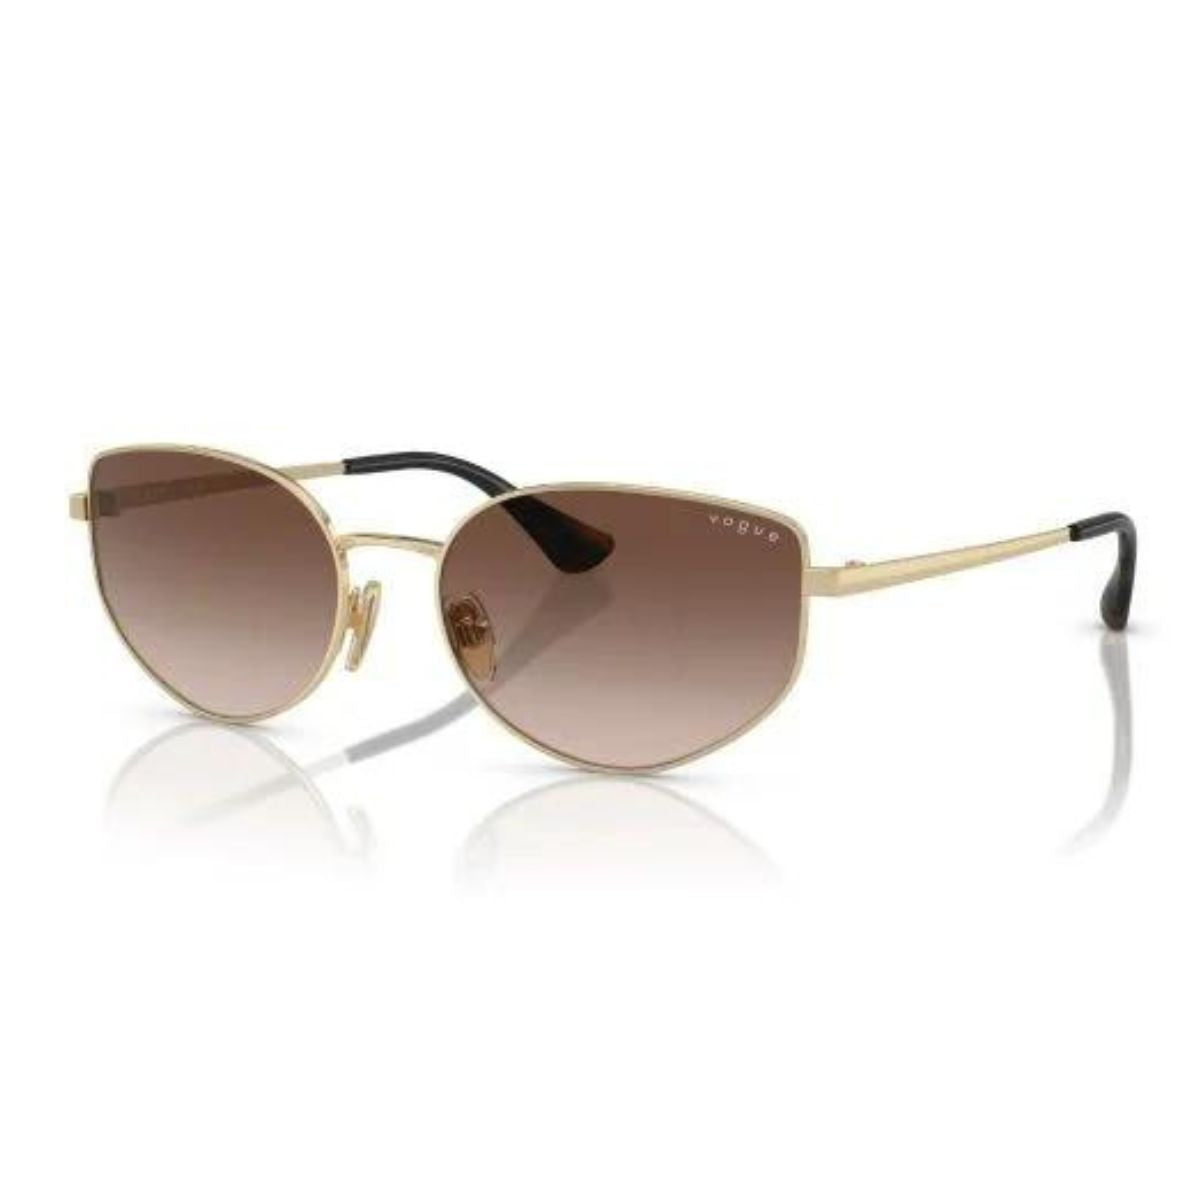 "Vogue sunglasses in gold metal for women."